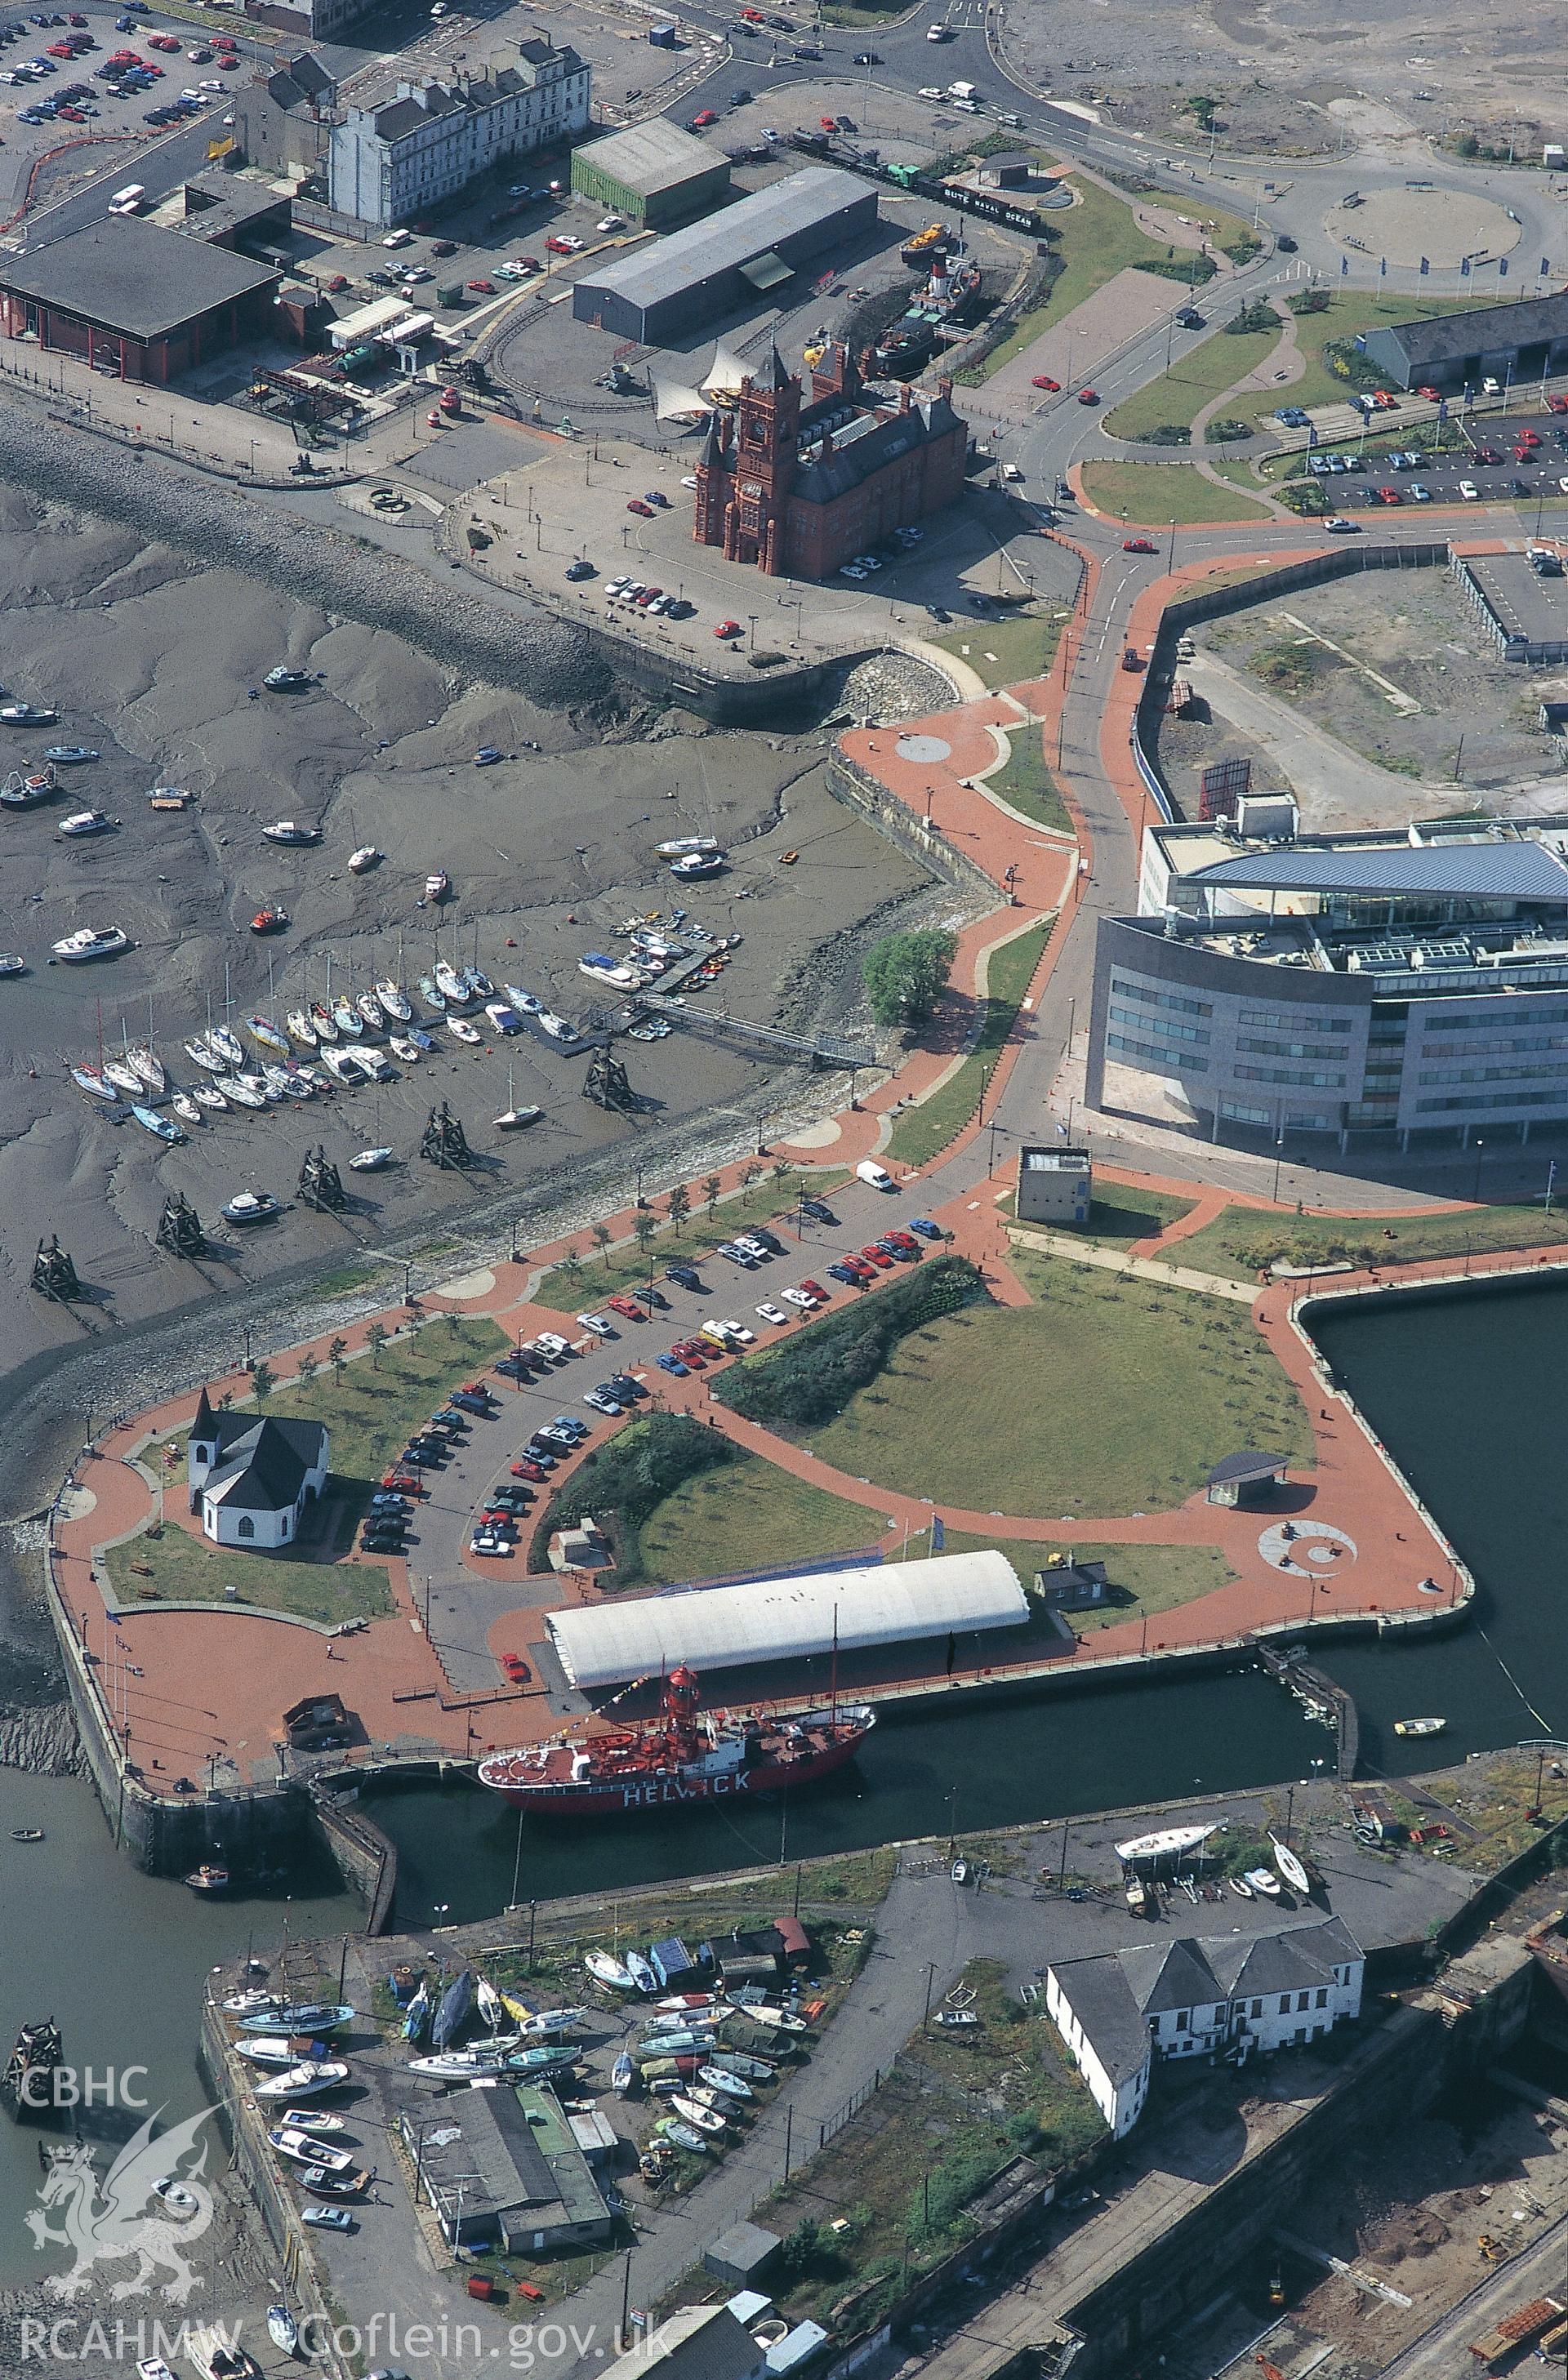 RCAHMW colour oblique aerial photograph of Roath Basin, Cardiff Docks taken on 20/07/1995 by C.R. Musson